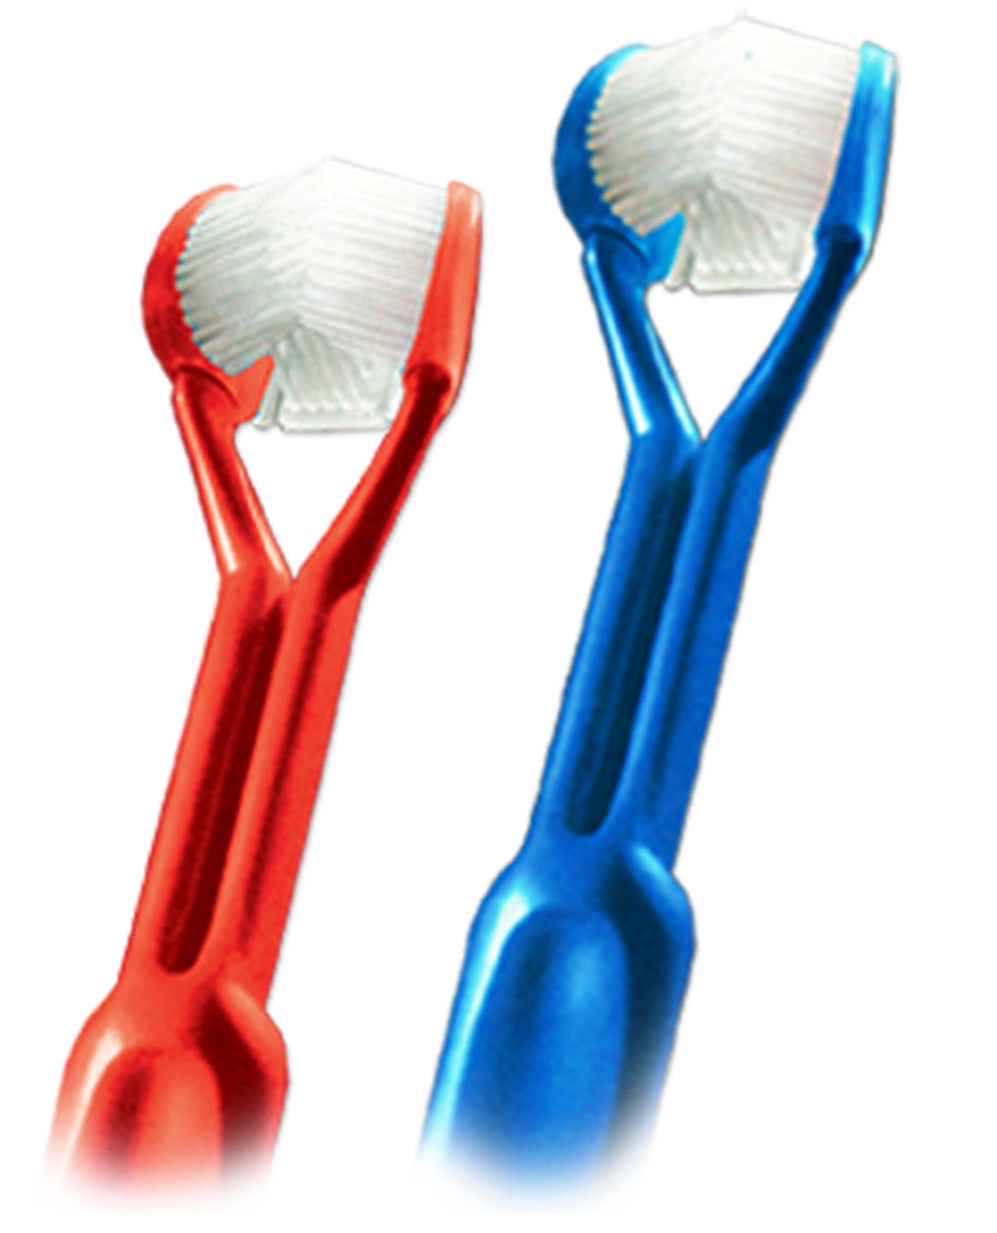 specialty toothbrushes